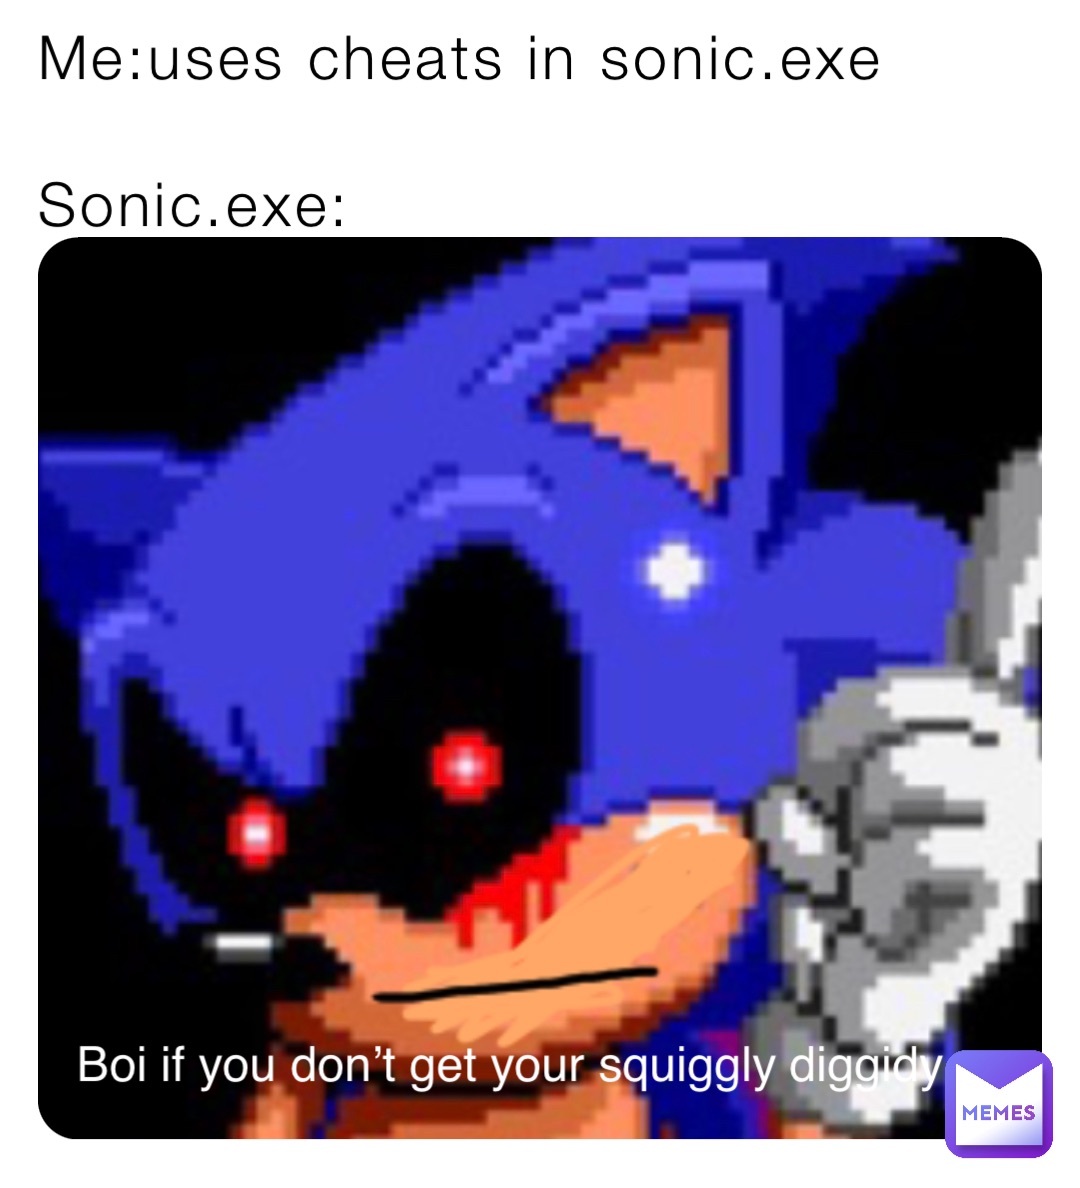 Me:uses cheats in sonic.exe

Sonic.exe: Boi if you don’t get your squiggly diggidy